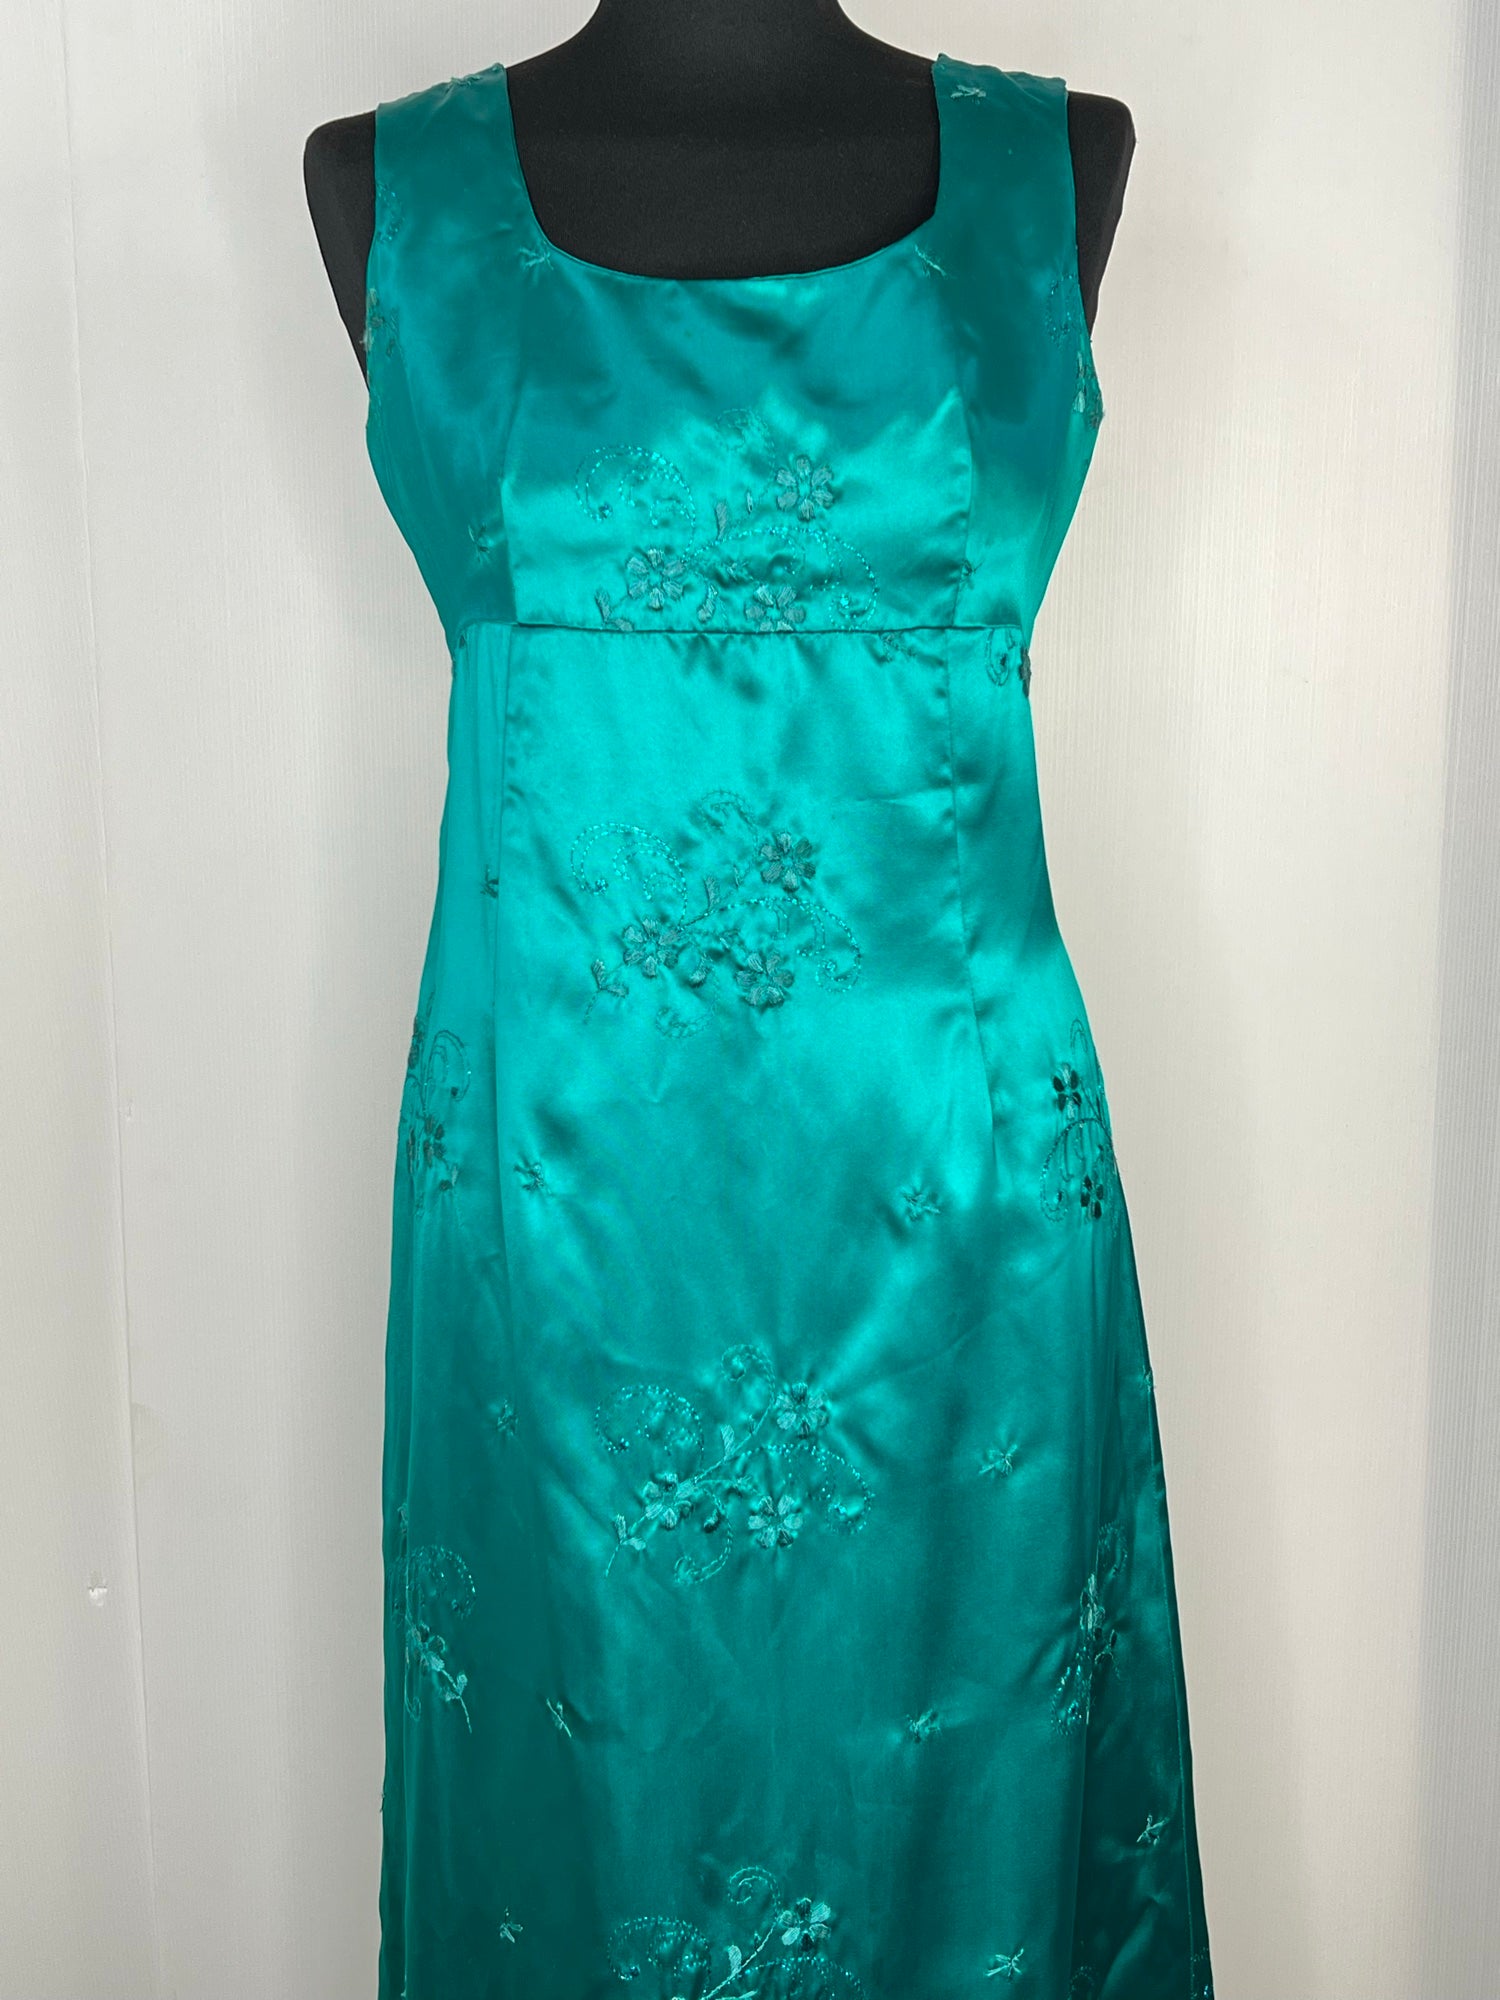 womens  vintage  Turquoise  retro  party season  party dress  oriental  occasion  maxi dress  Green  floral embroidered  evening dress  evening  dress  cocktail  christmassy  christmas  60s  1960s  16